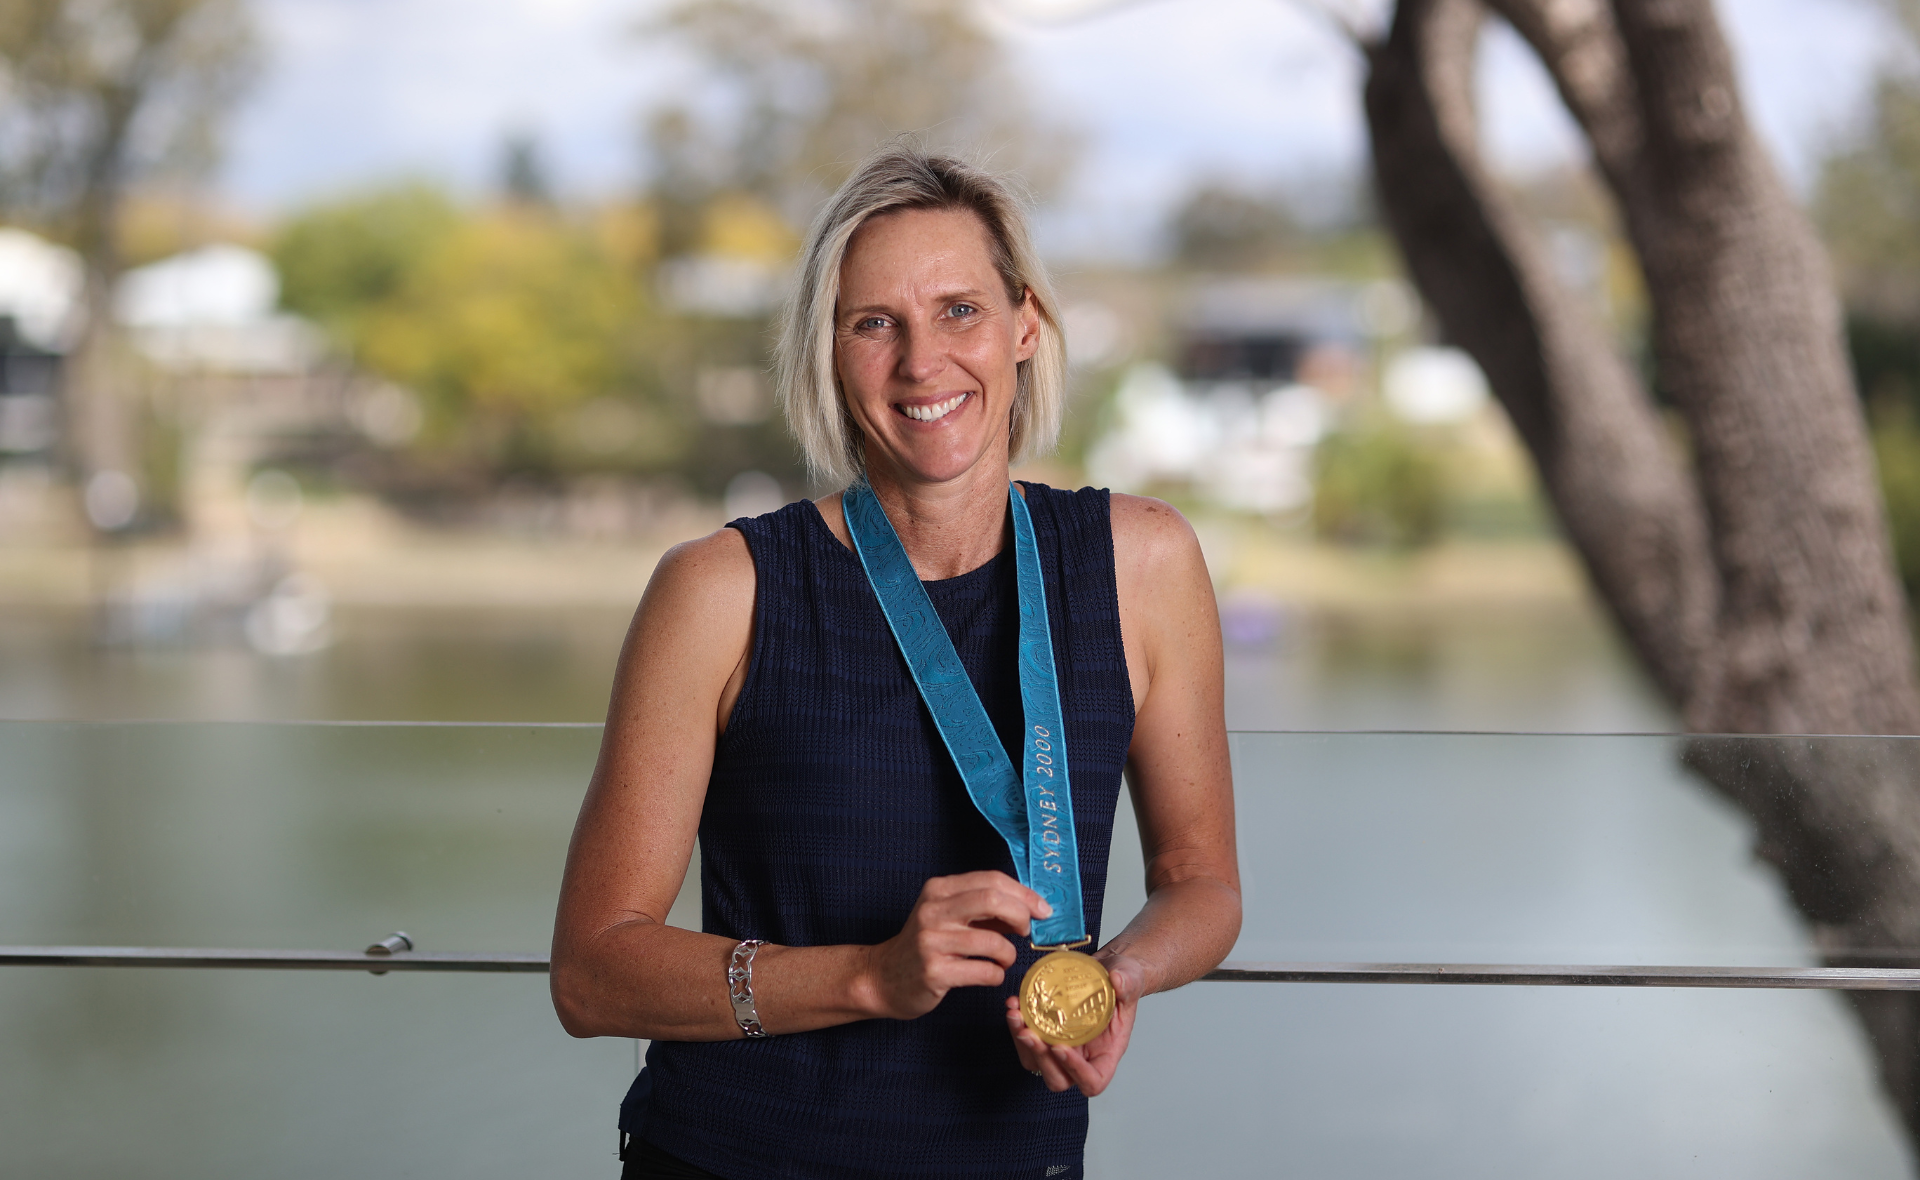 “Madam Butterfly” Susie O’Neill talks about life after retiring as a champion swimmer